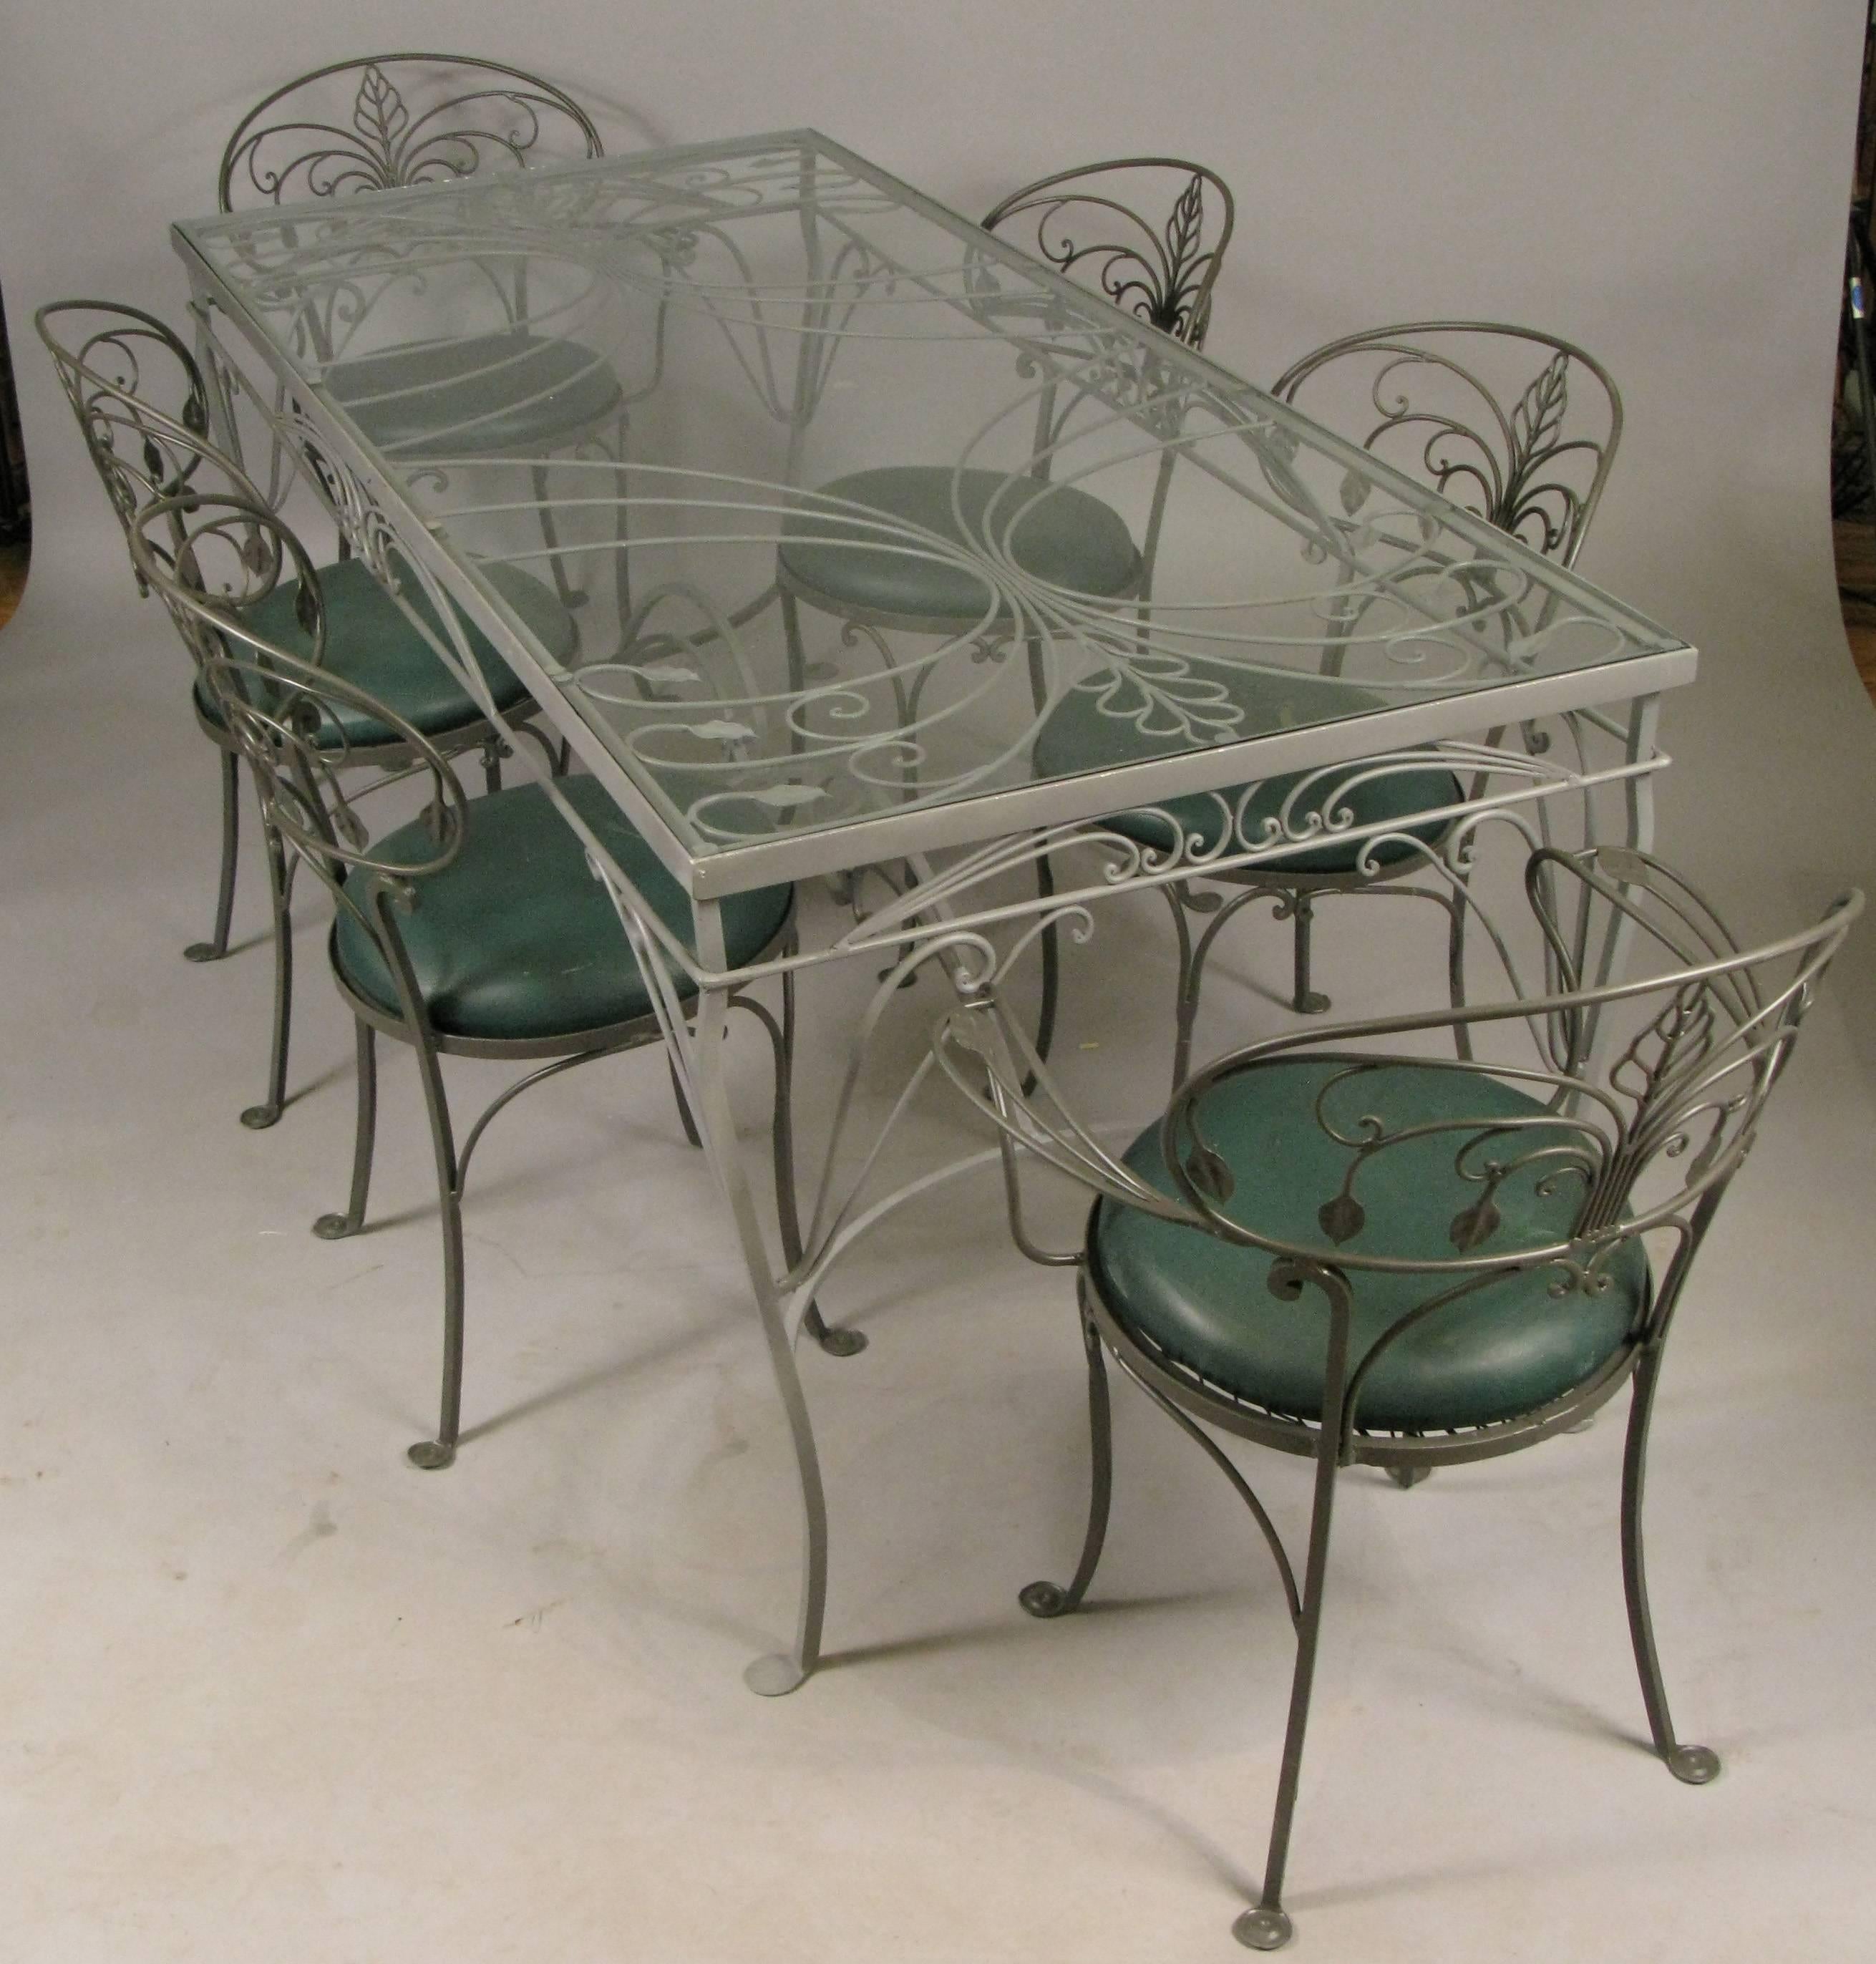 A beautiful vintage 1950s wrought iron garden dining set made by Salterini. This is one of their best tables, with beautiful scroll details, and the matching set of six chairs, including a pair of armchairs. The entire set has been refinished with a